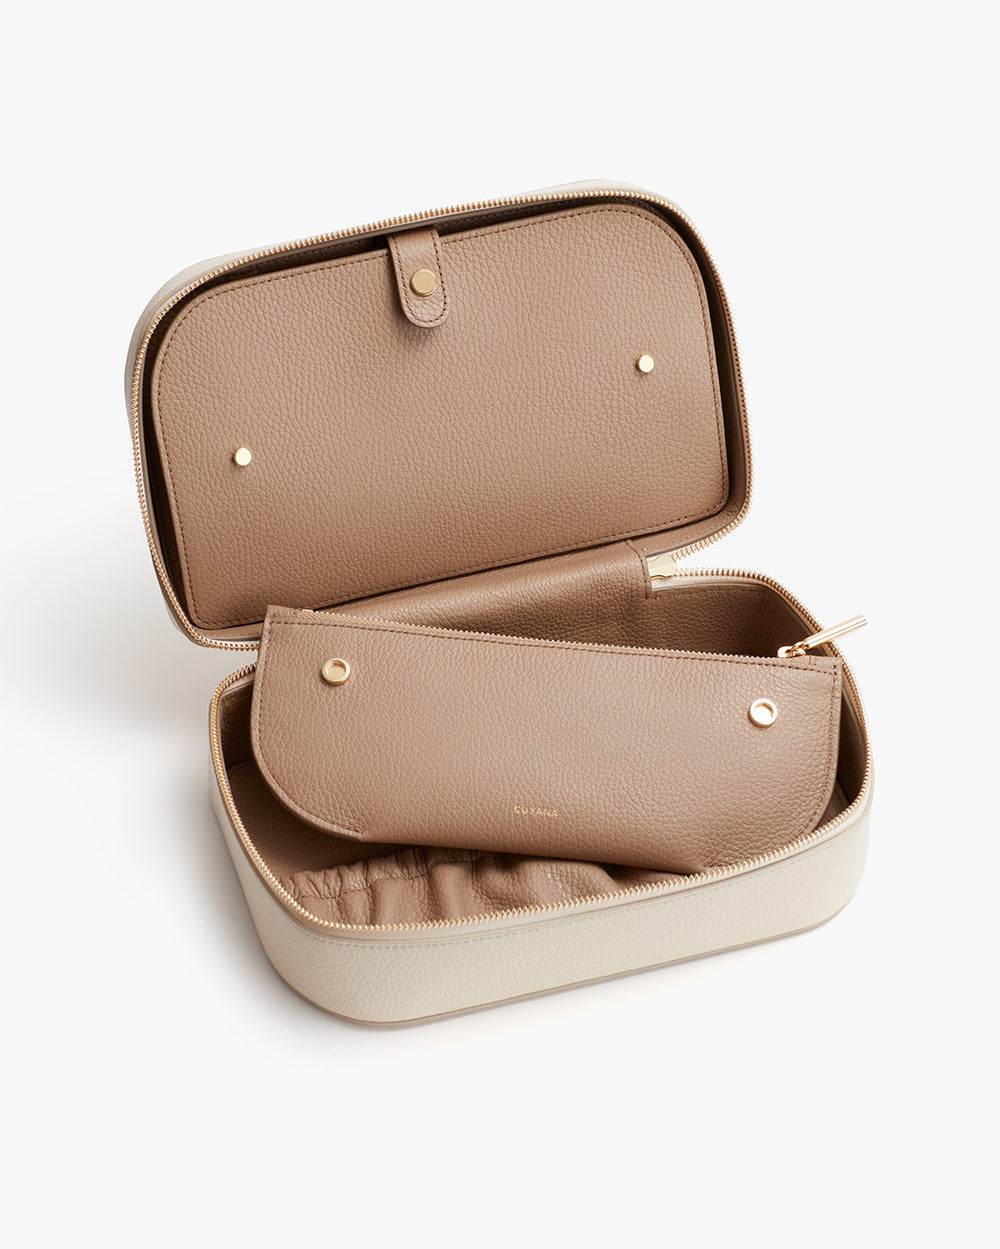 Open case with a smaller pouch inside placed on a plain background.